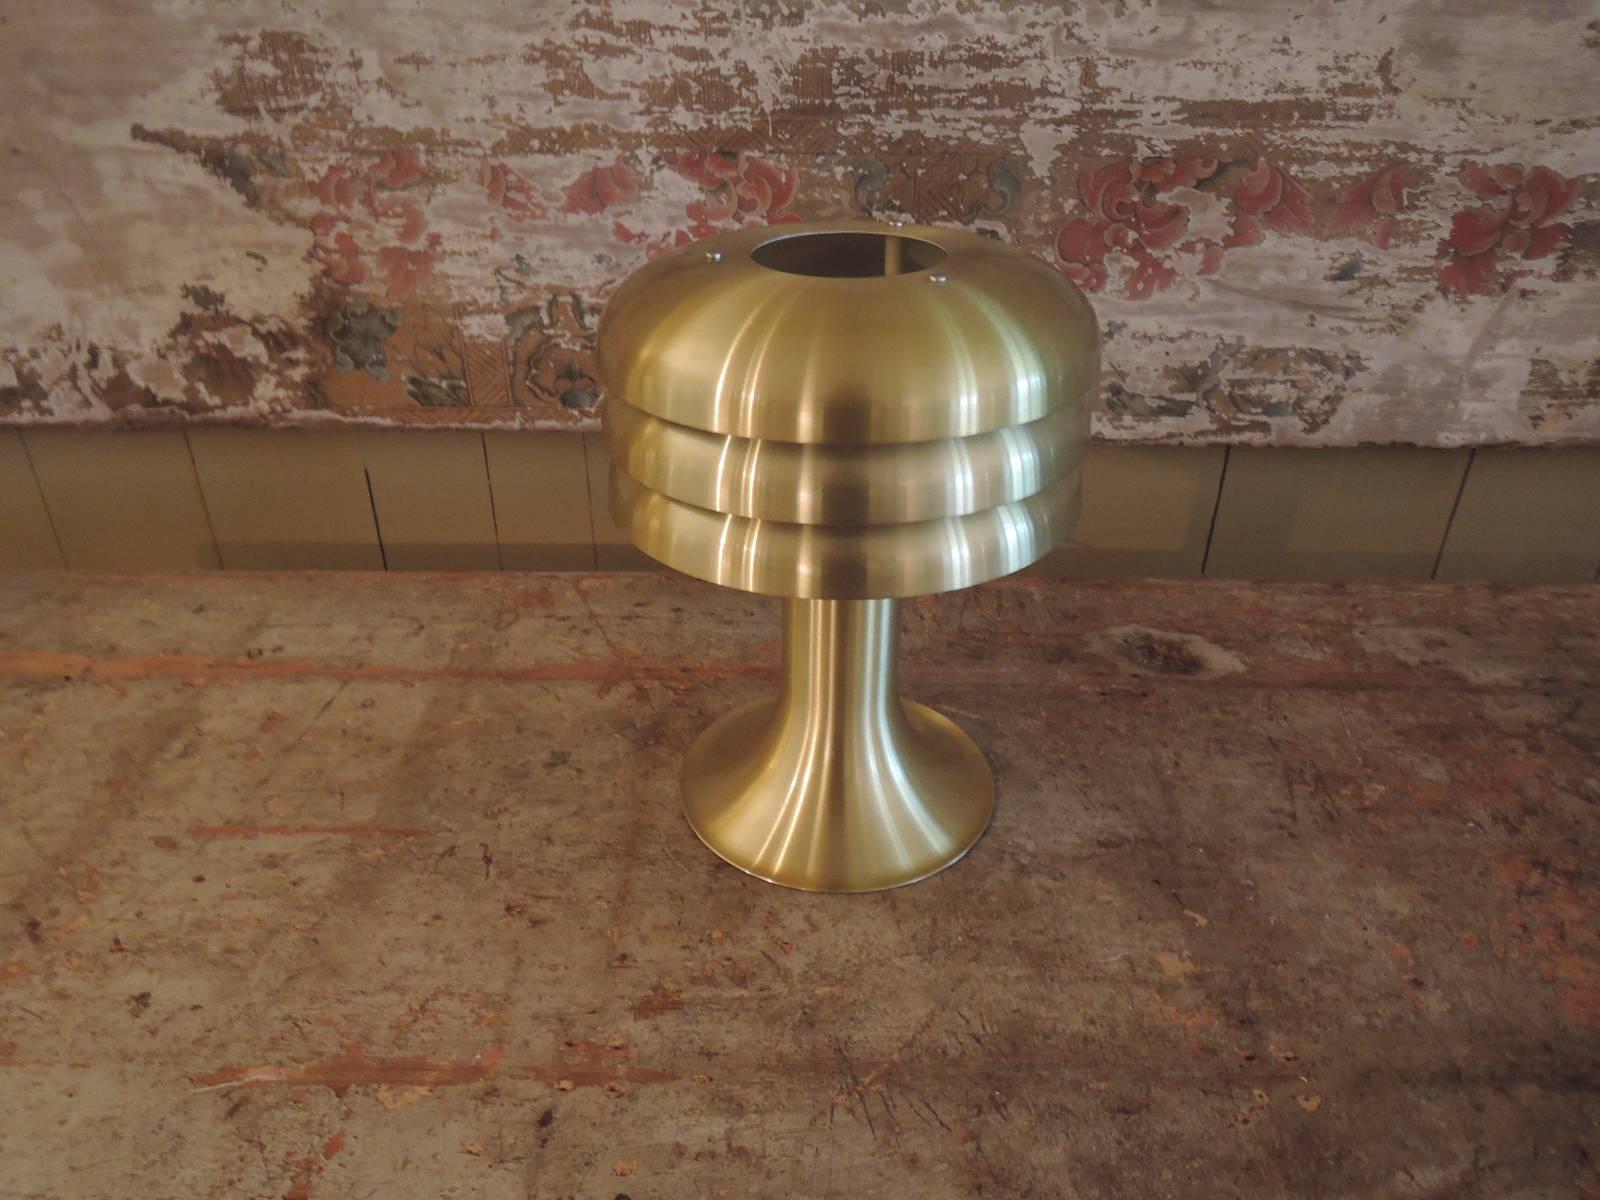 Nice table lamp in brushed gold aluminium. Model BN25.
Designed by Hans-Agne Jakobsson, Sweden, circa 1974 and produced by Markyard. (original label).
The lamp is fully working and in good vintage condition.
Some age related marks and surface